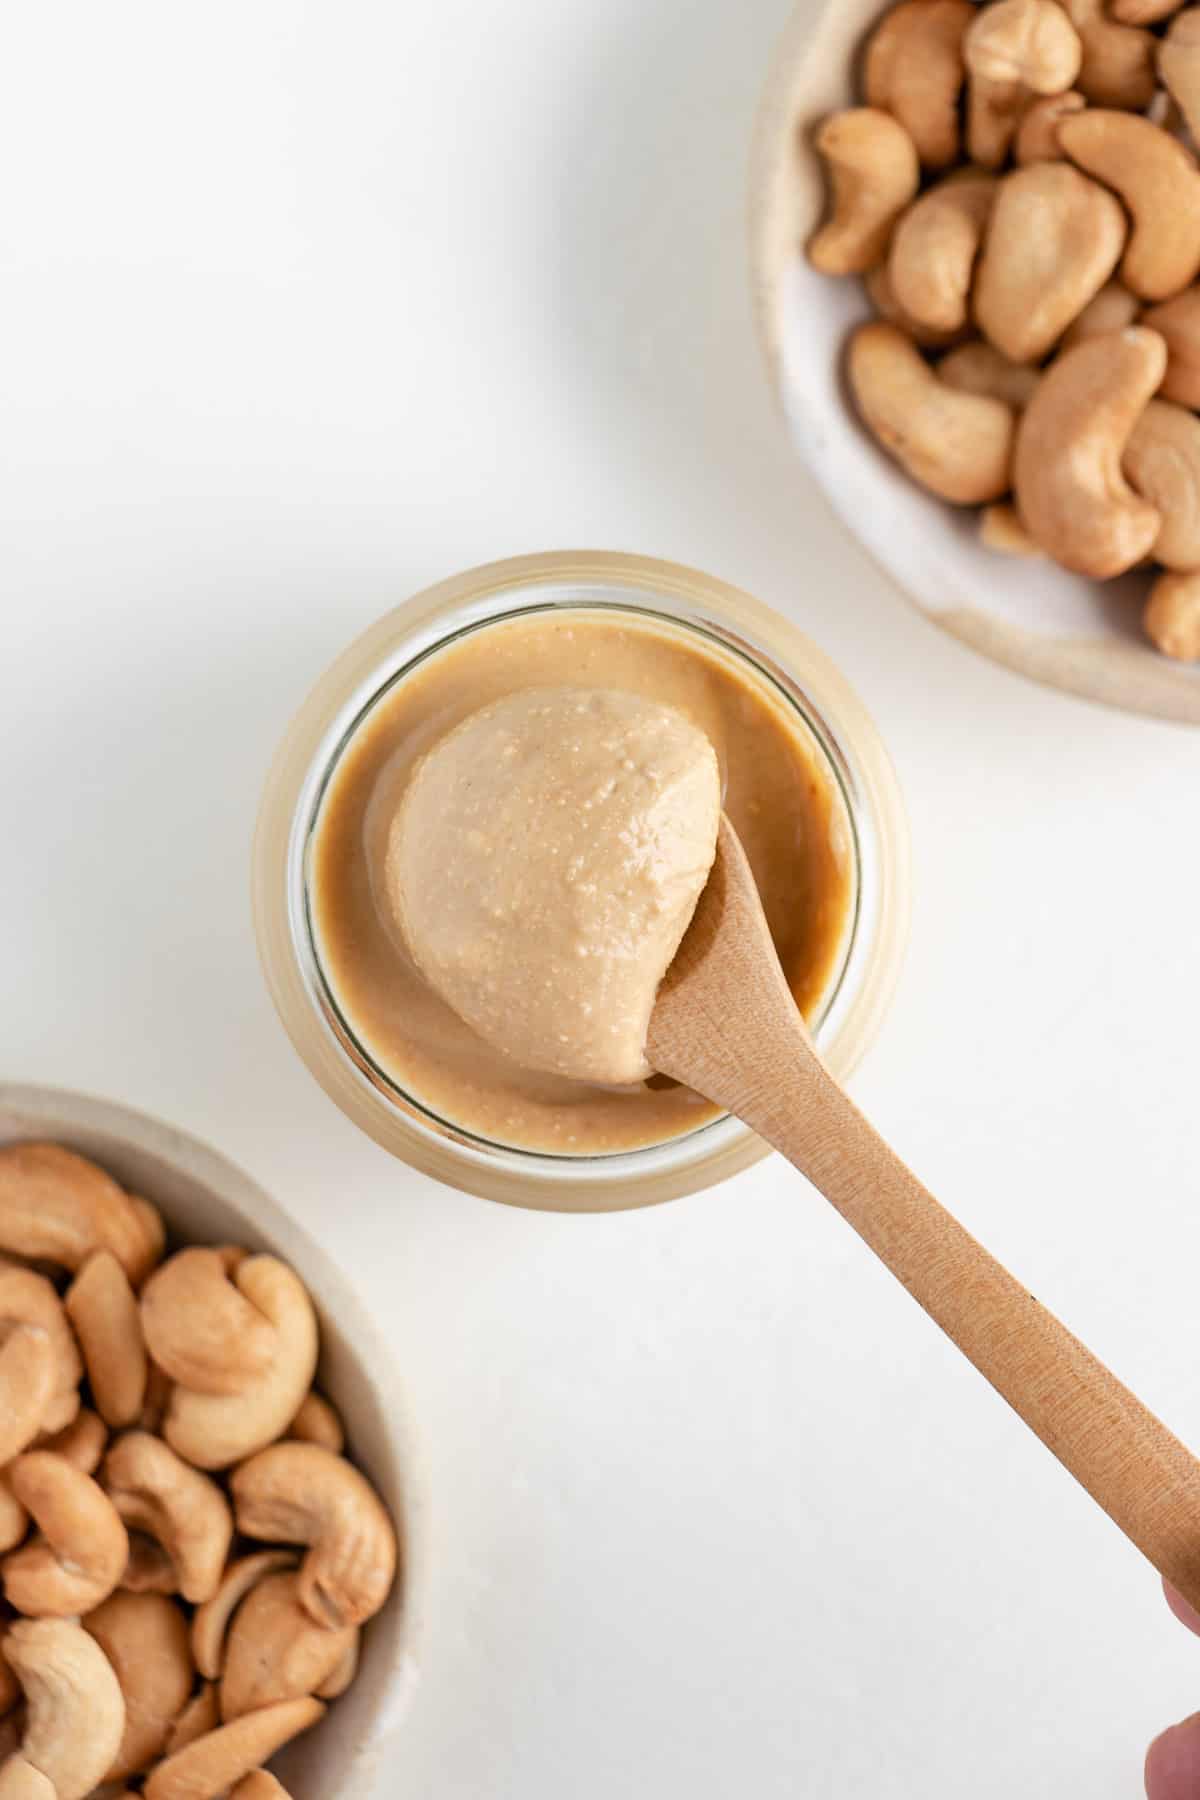 a wooden spoon scooping cashew butter out of a glass jar